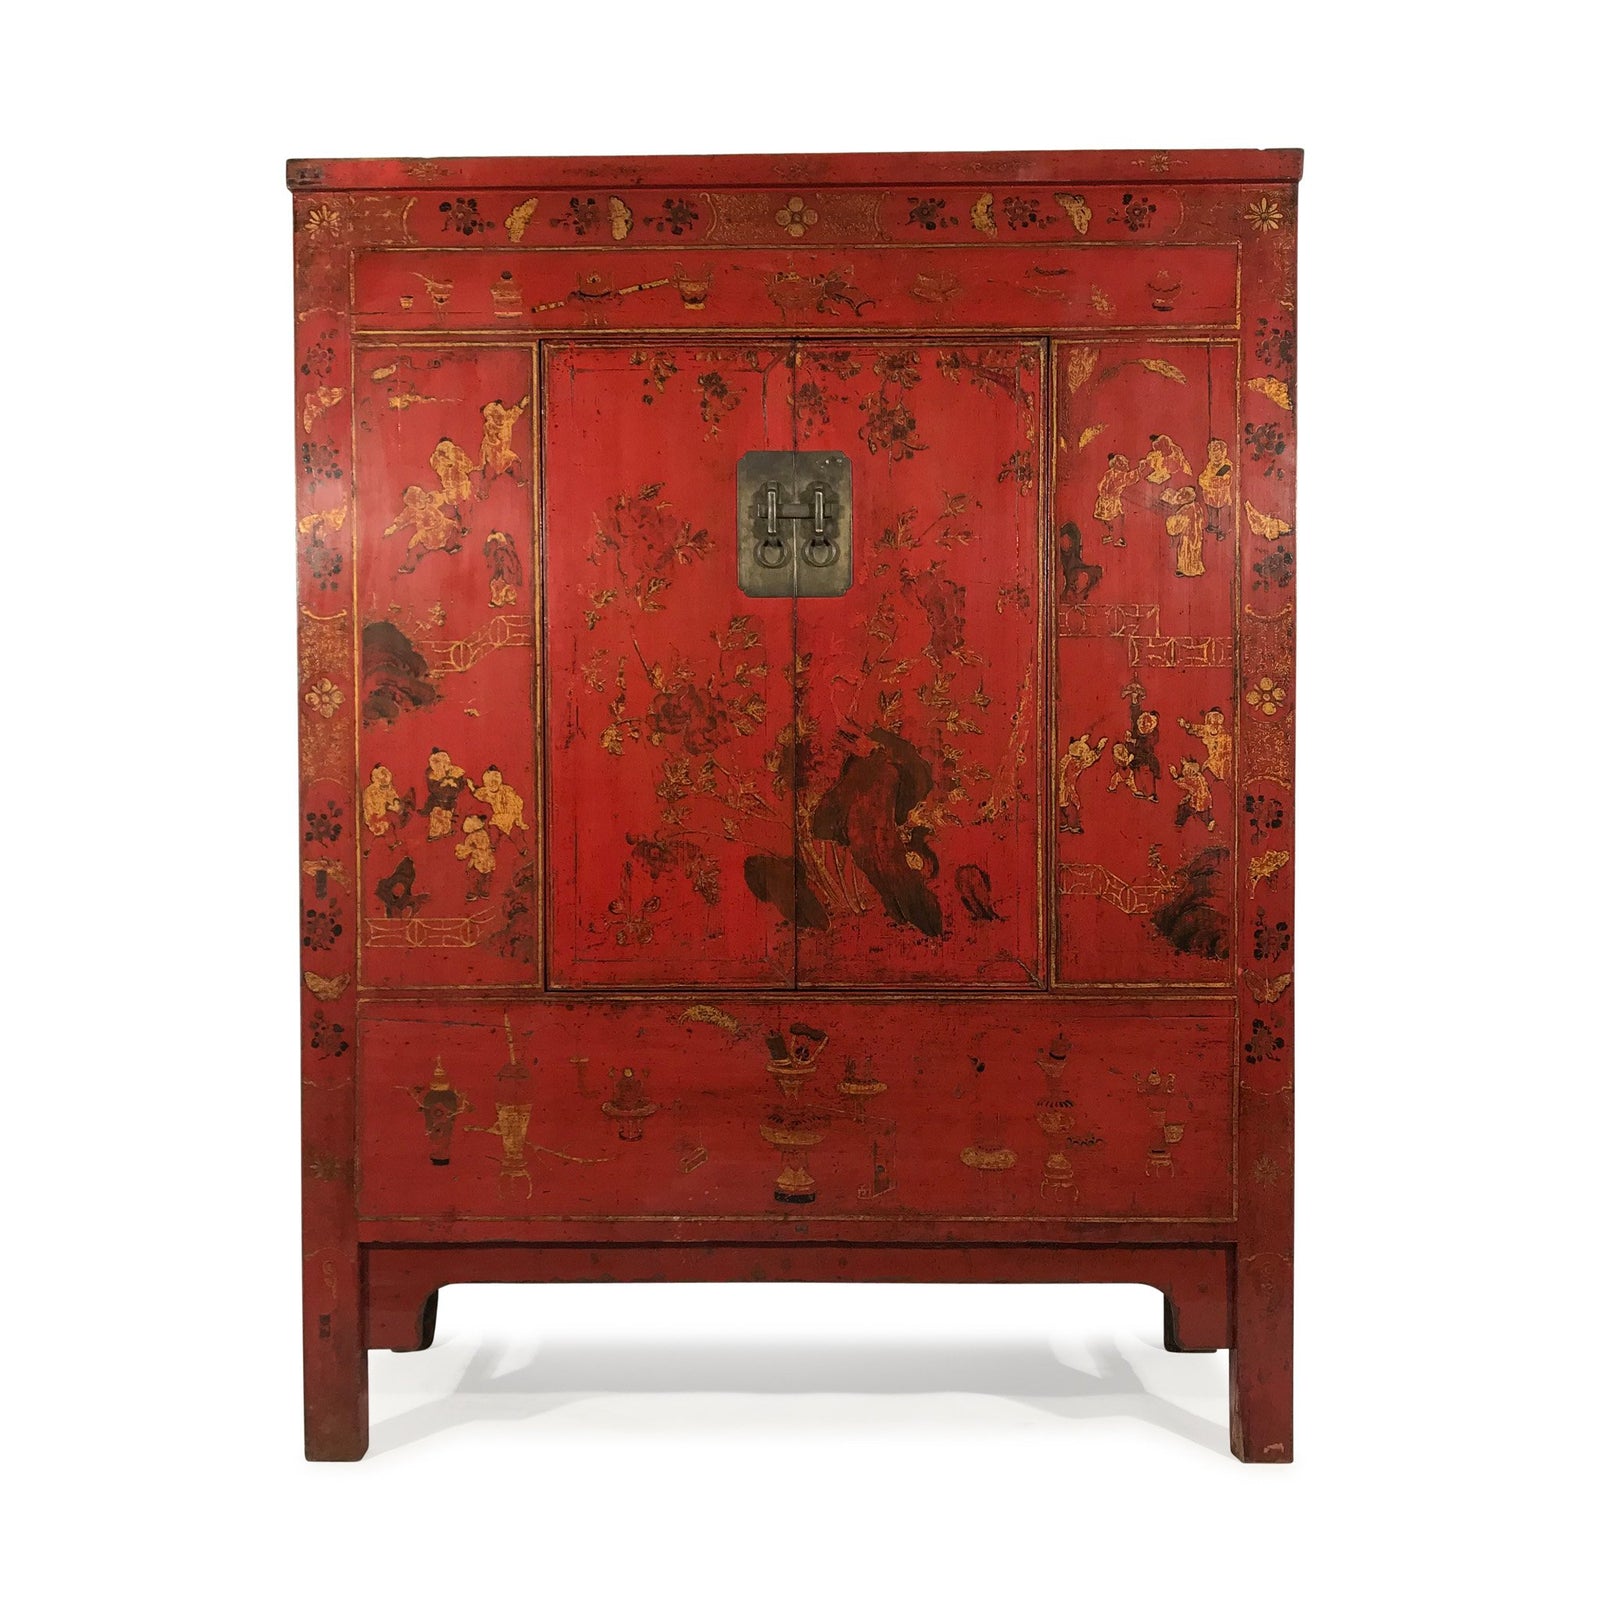 Red Lacquer Wedding Cabinet From Shanxi Province - 19thC - 136 x 53 x 176 (wxdxh cms) - C1394